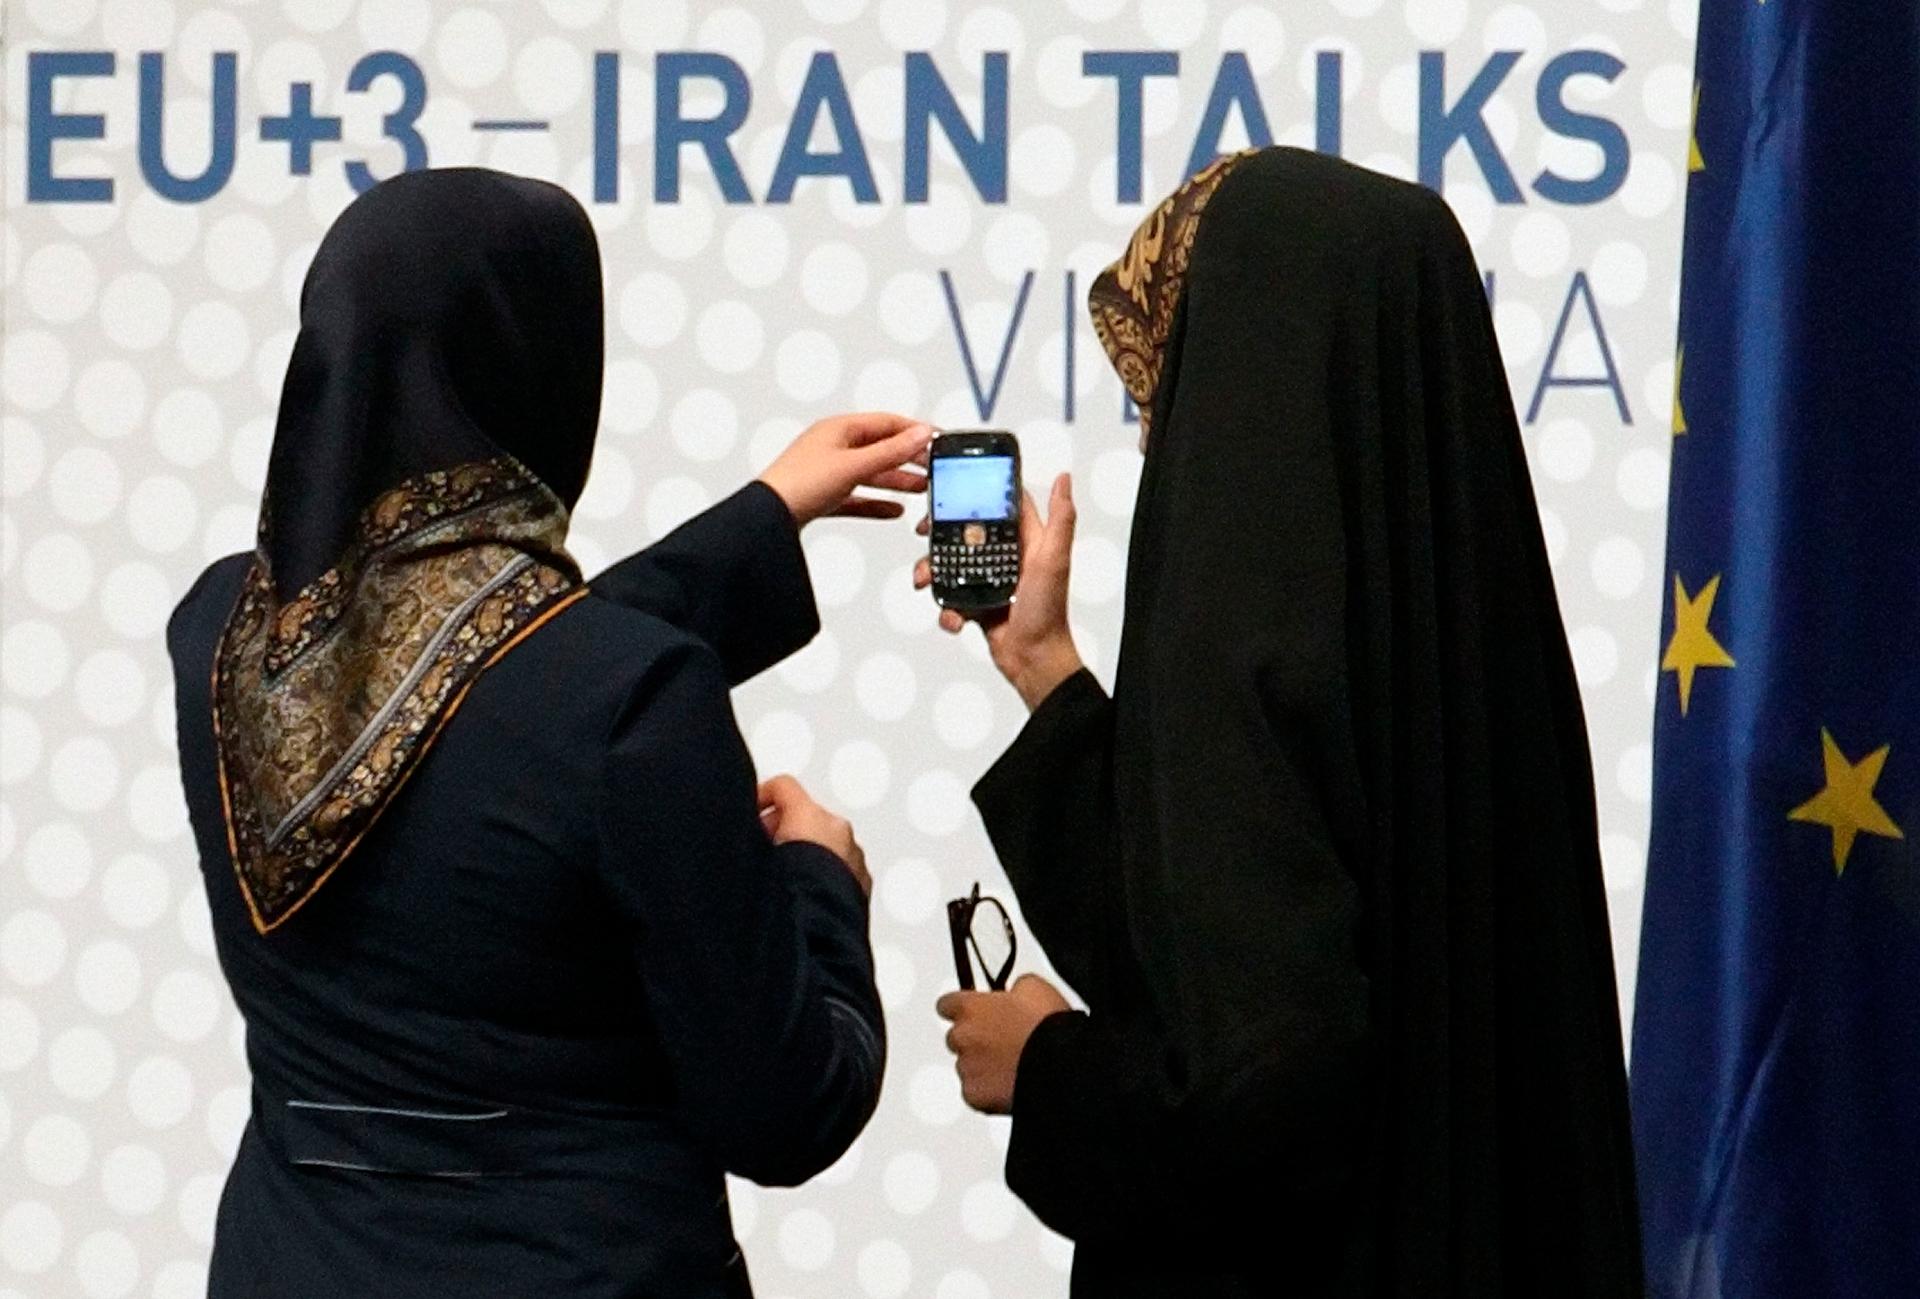 Iranian journalists taking selfies with a smartphone